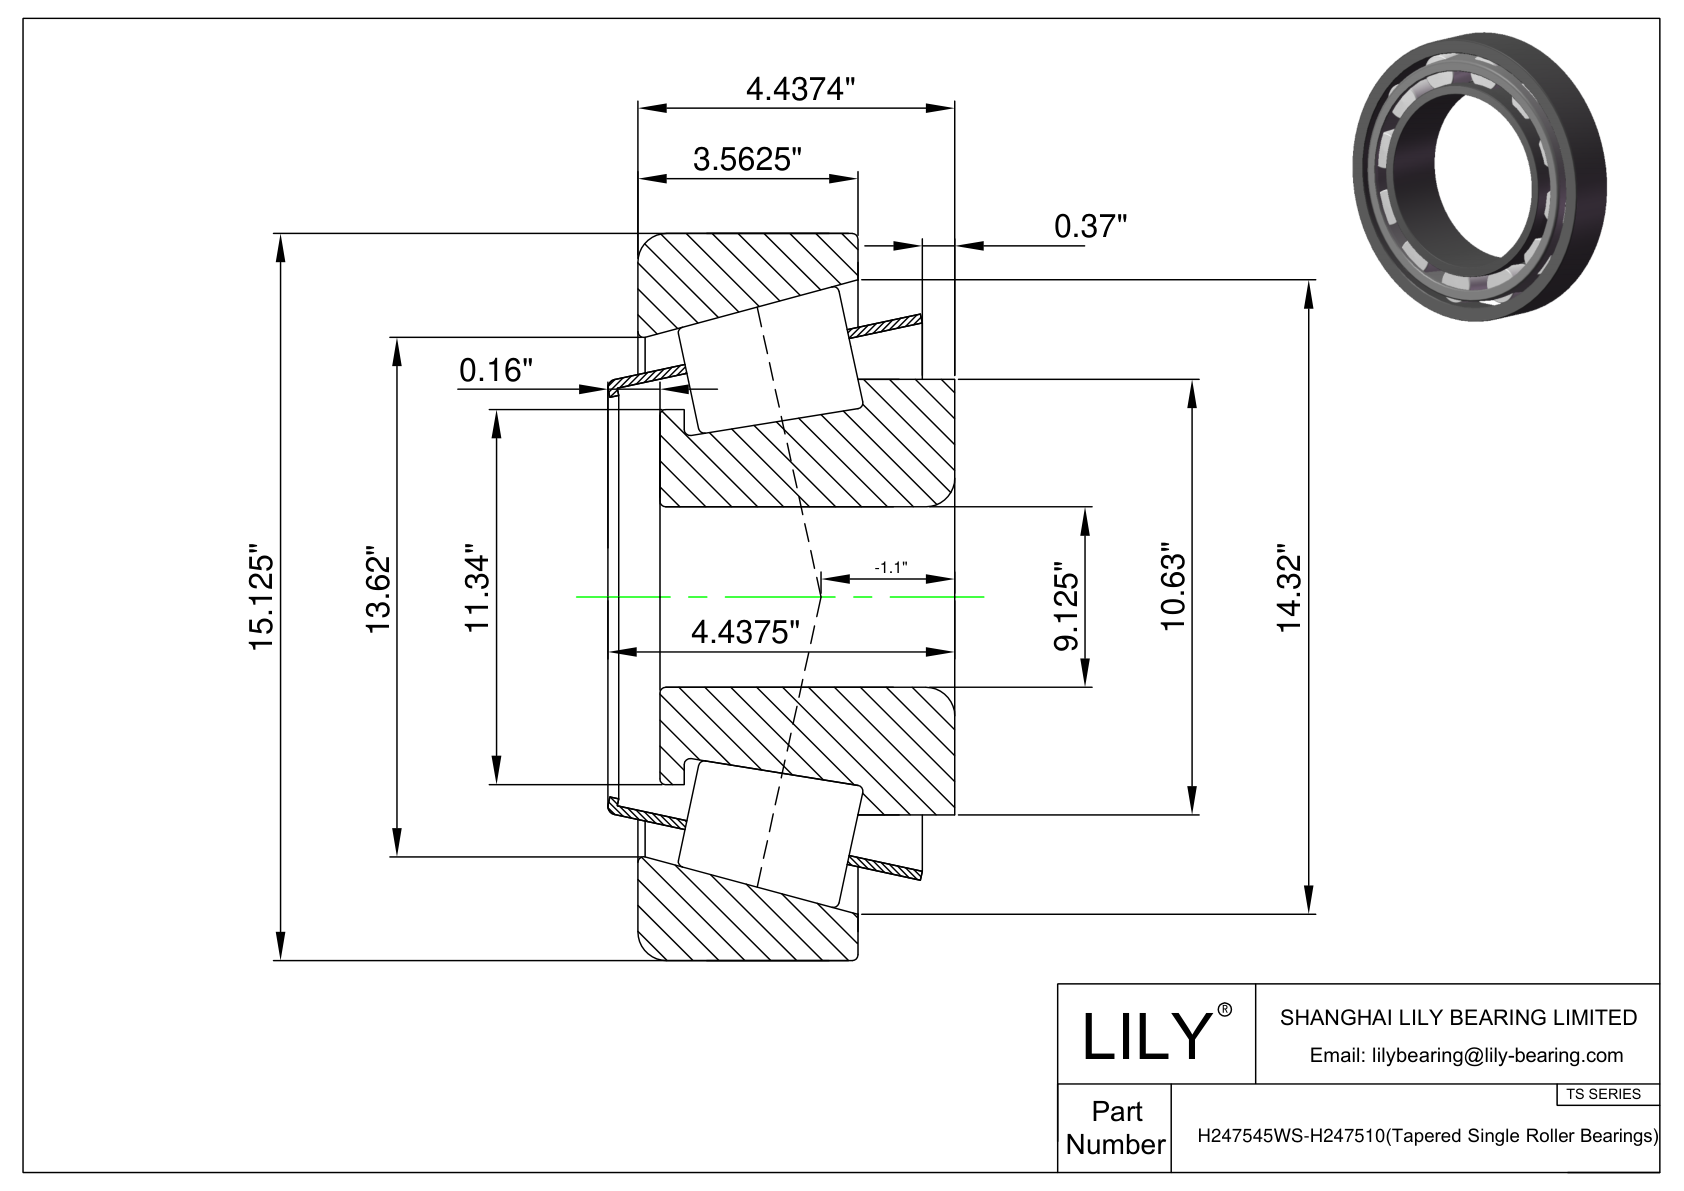 H247545WS-H247510 TS (Tapered Single Roller Bearings) (Imperial) cad drawing